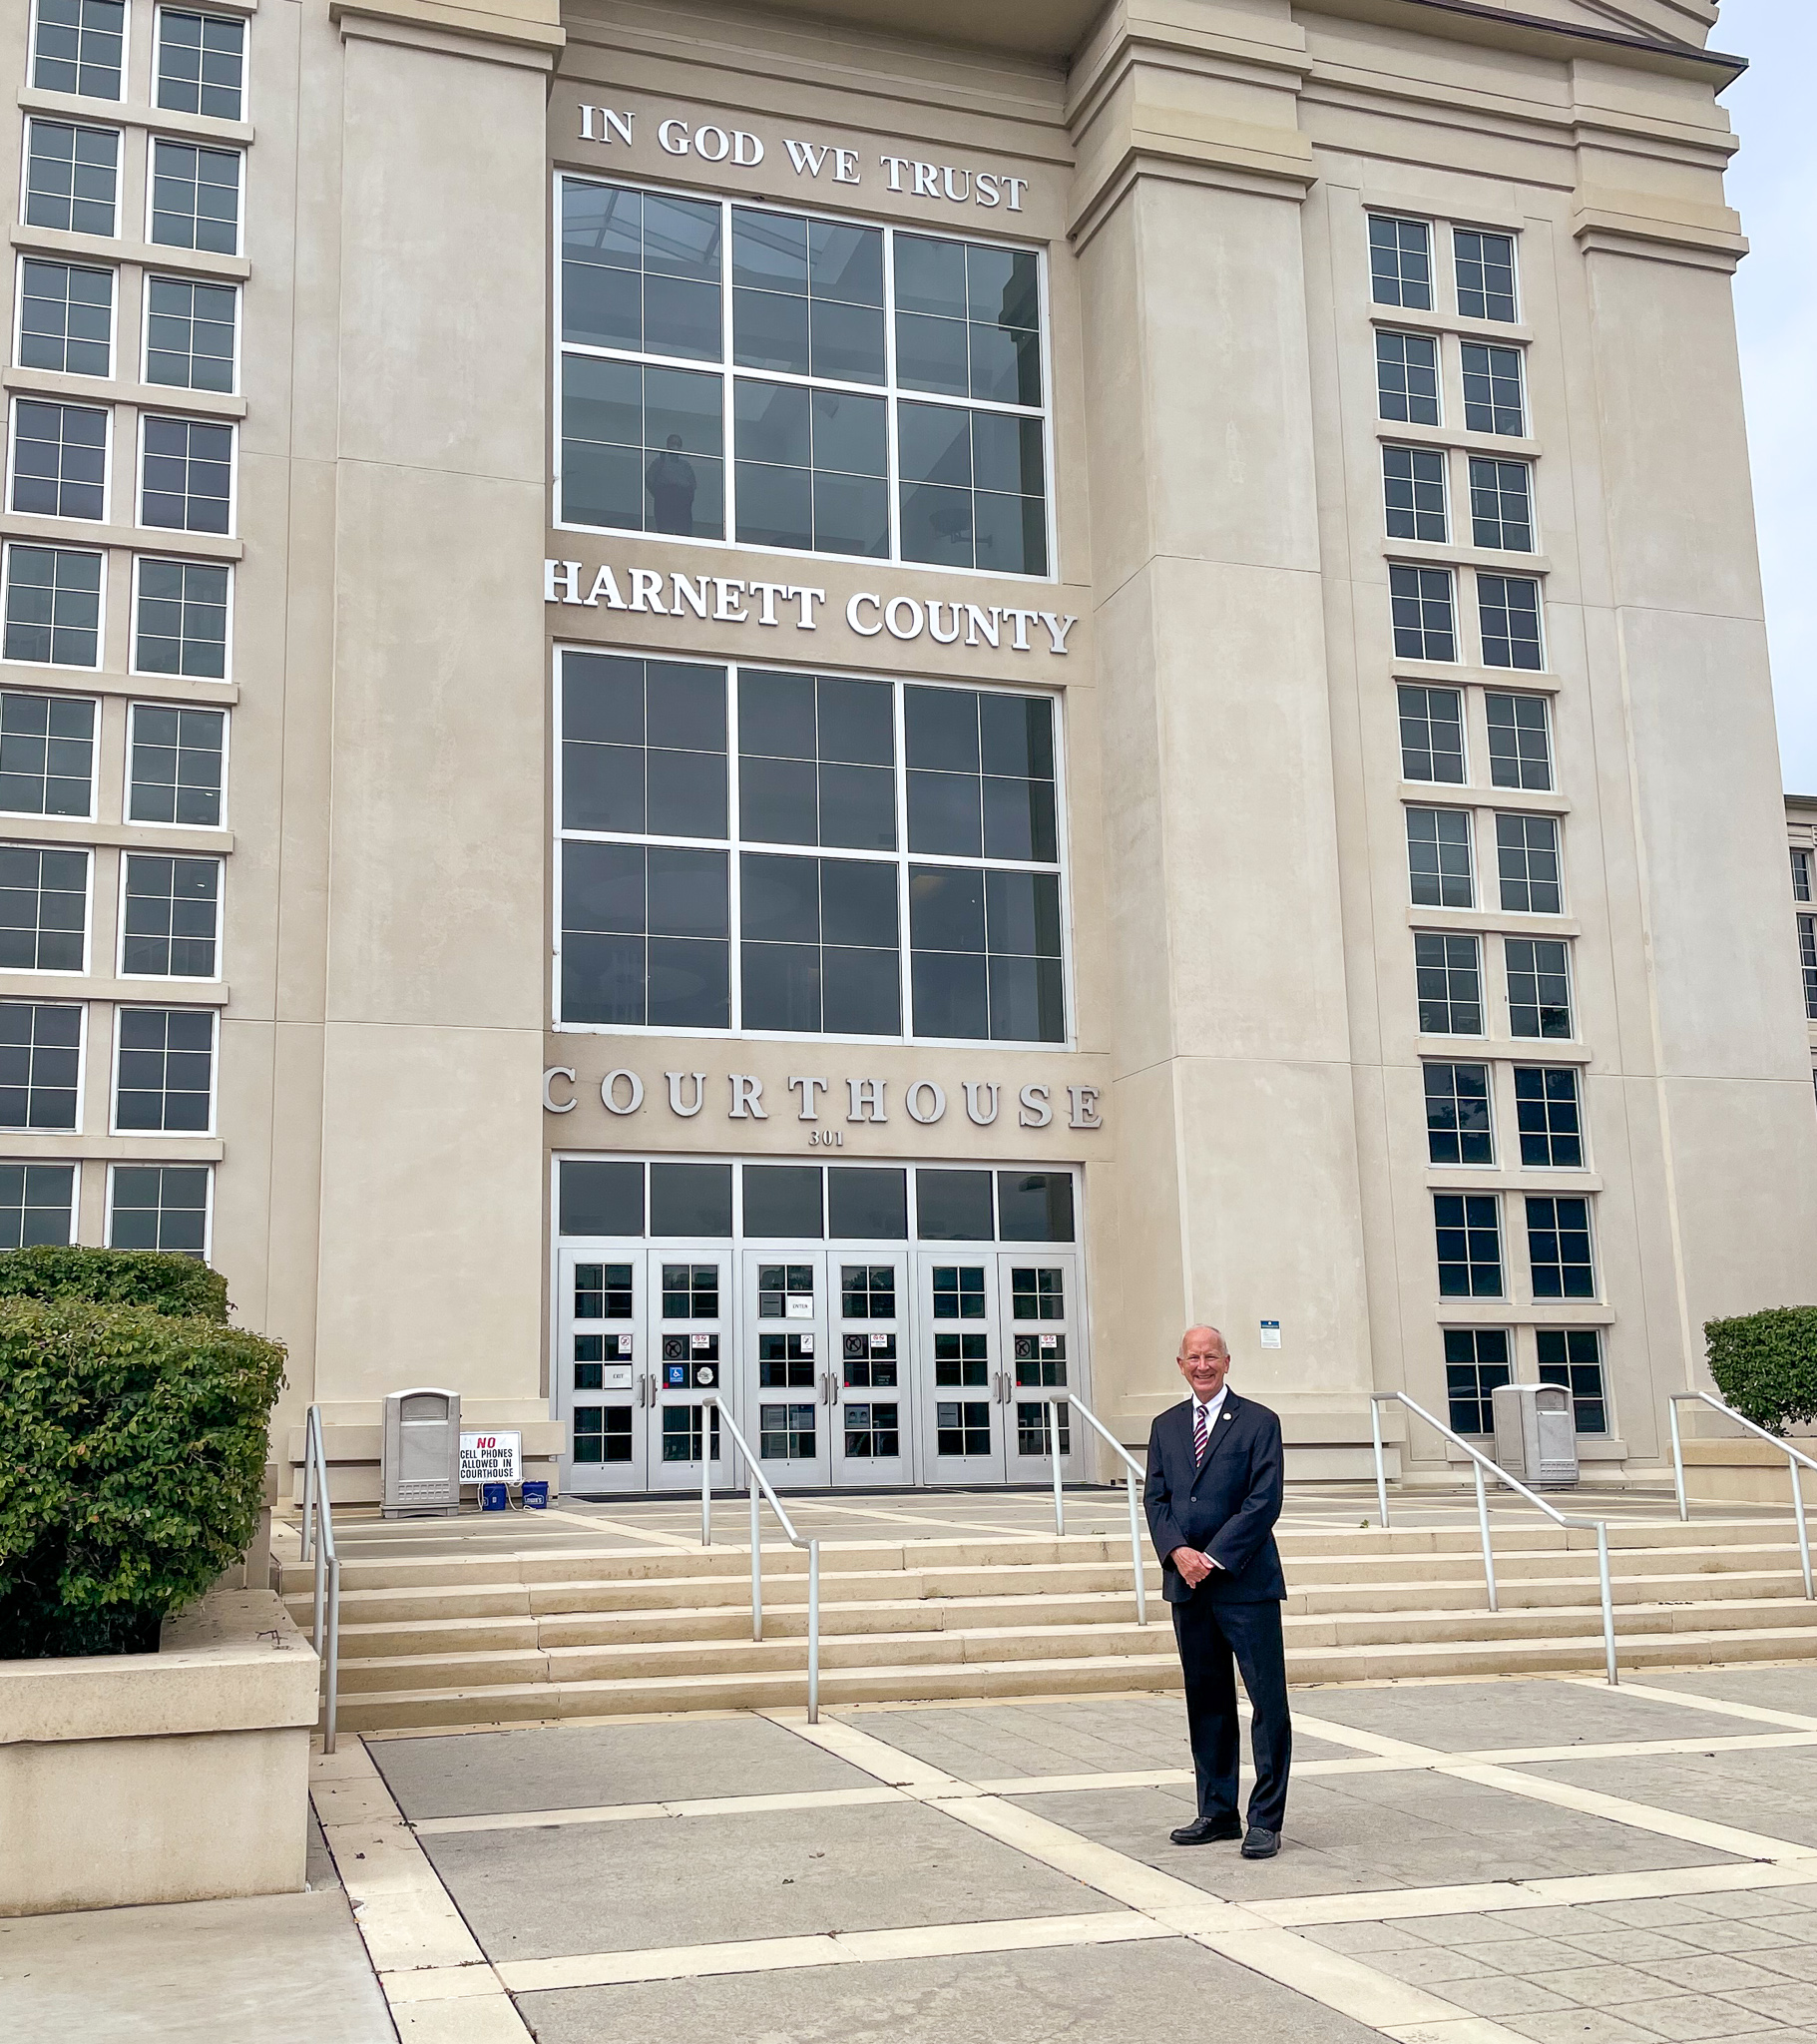 Chief Justice Paul Newby in front of the Harnett County Courthouse